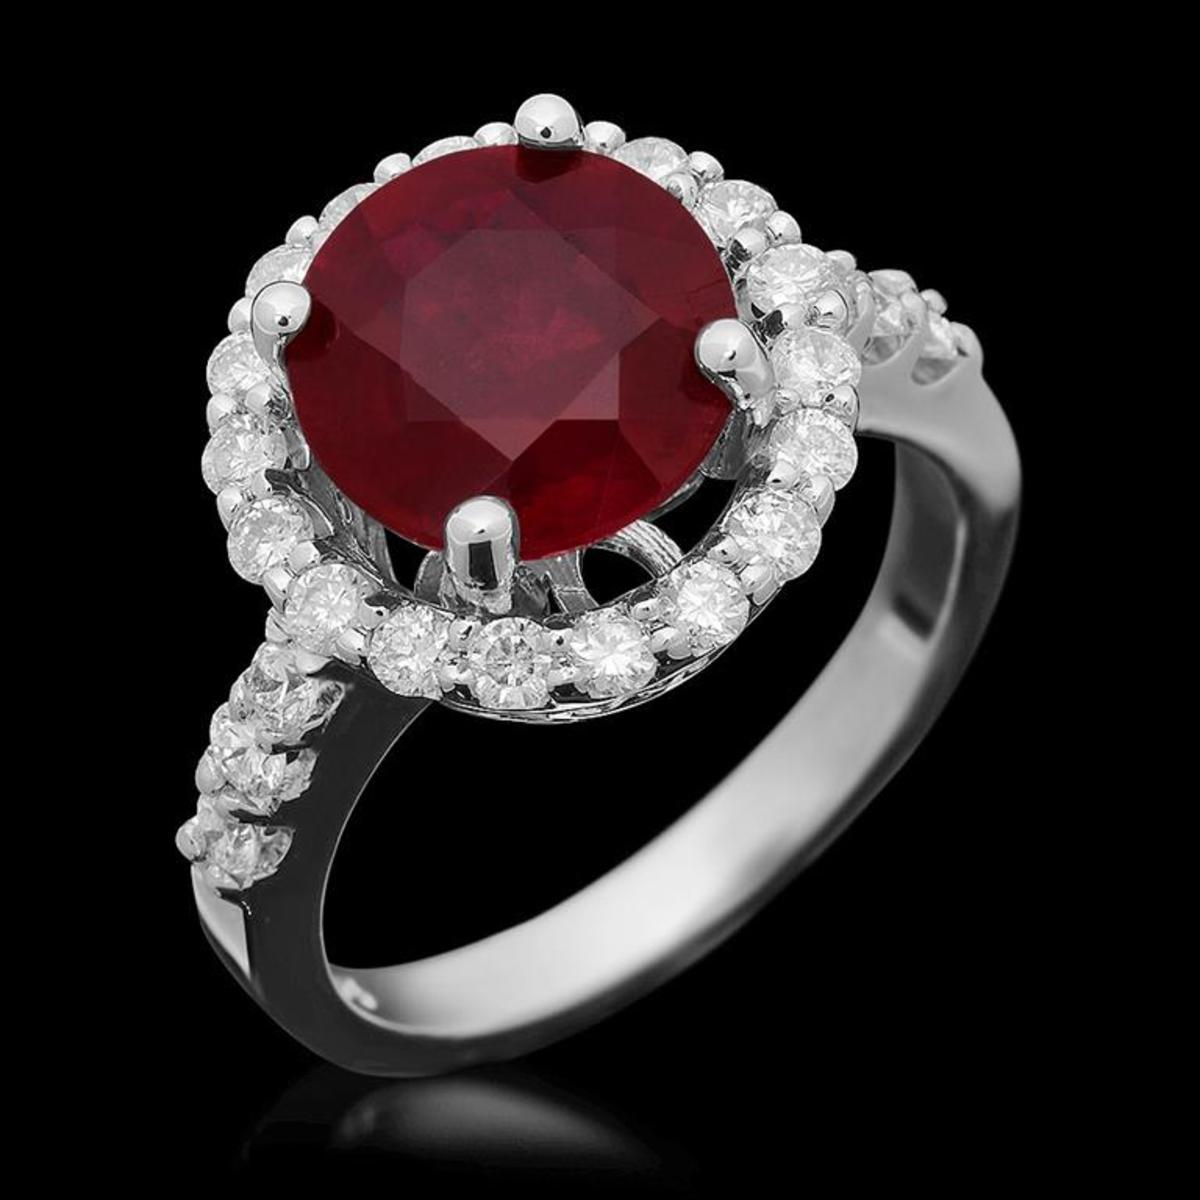 14K White Gold 3.83ct Ruby and 0.91ct Diamond Ring